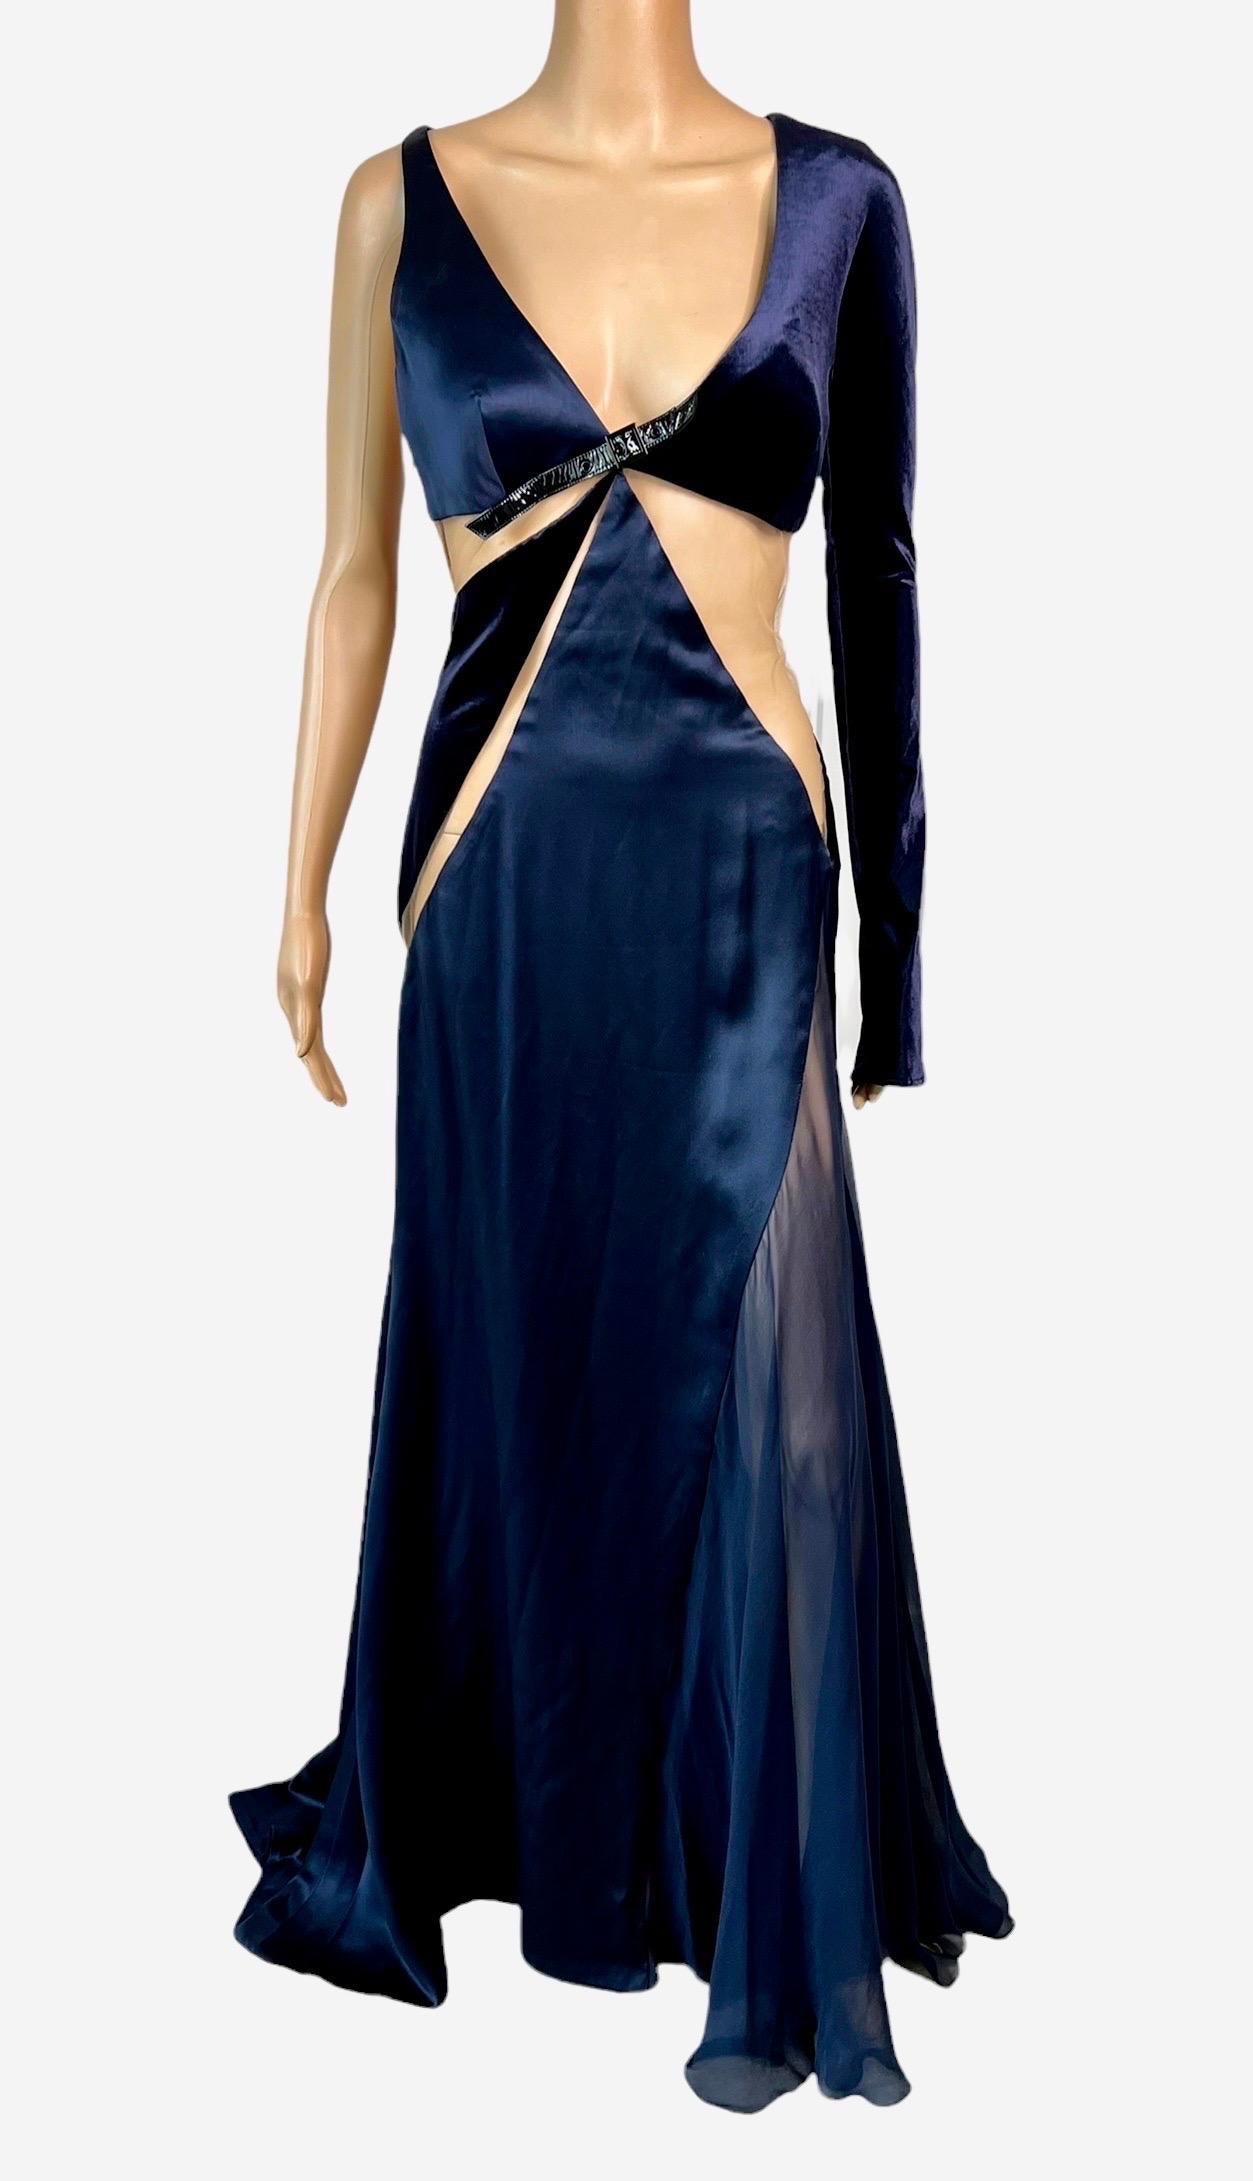 Versace F/W 2004 Runway Cutout Sheer Panels Buckle Detail Evening Dress Gown In Good Condition For Sale In Naples, FL